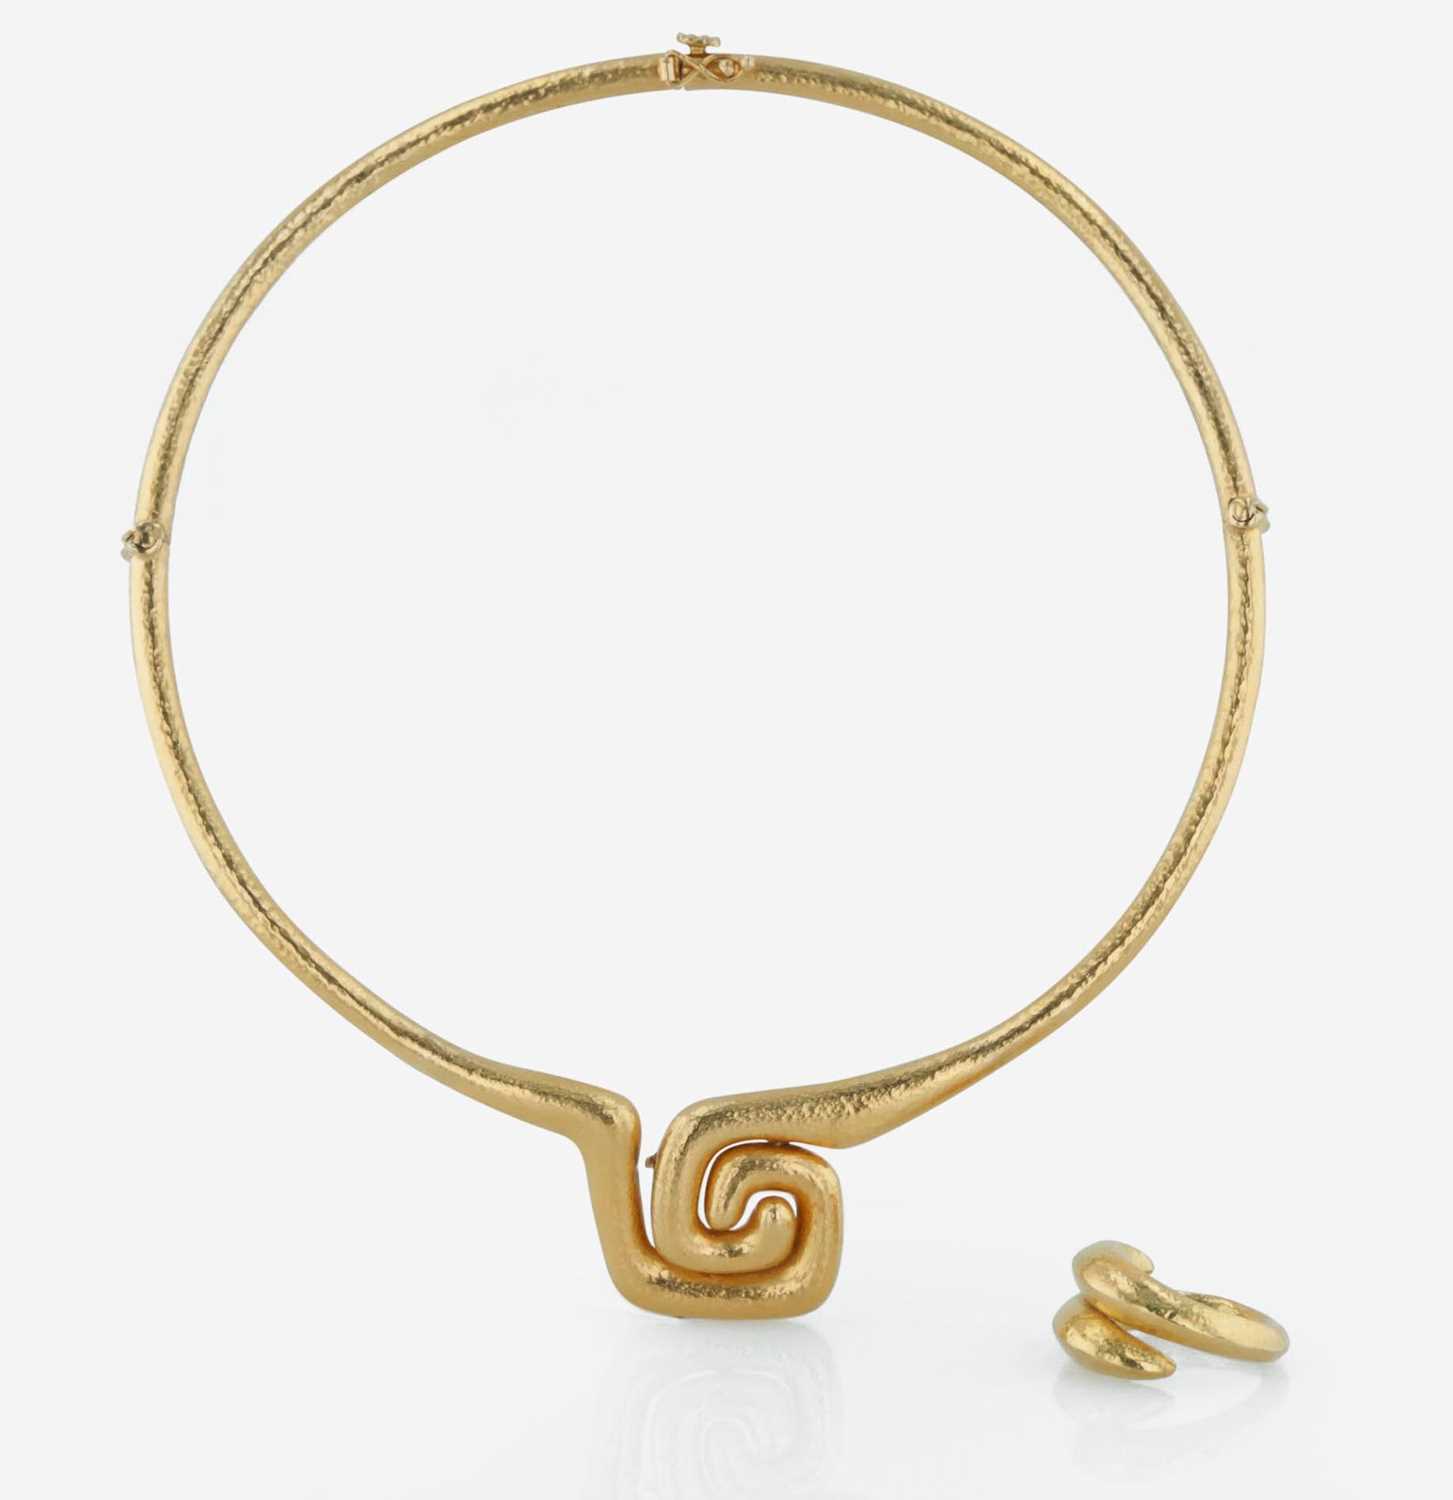 Lot 54 - 18K yellow gold necklace and ring, ilias LaLaounis